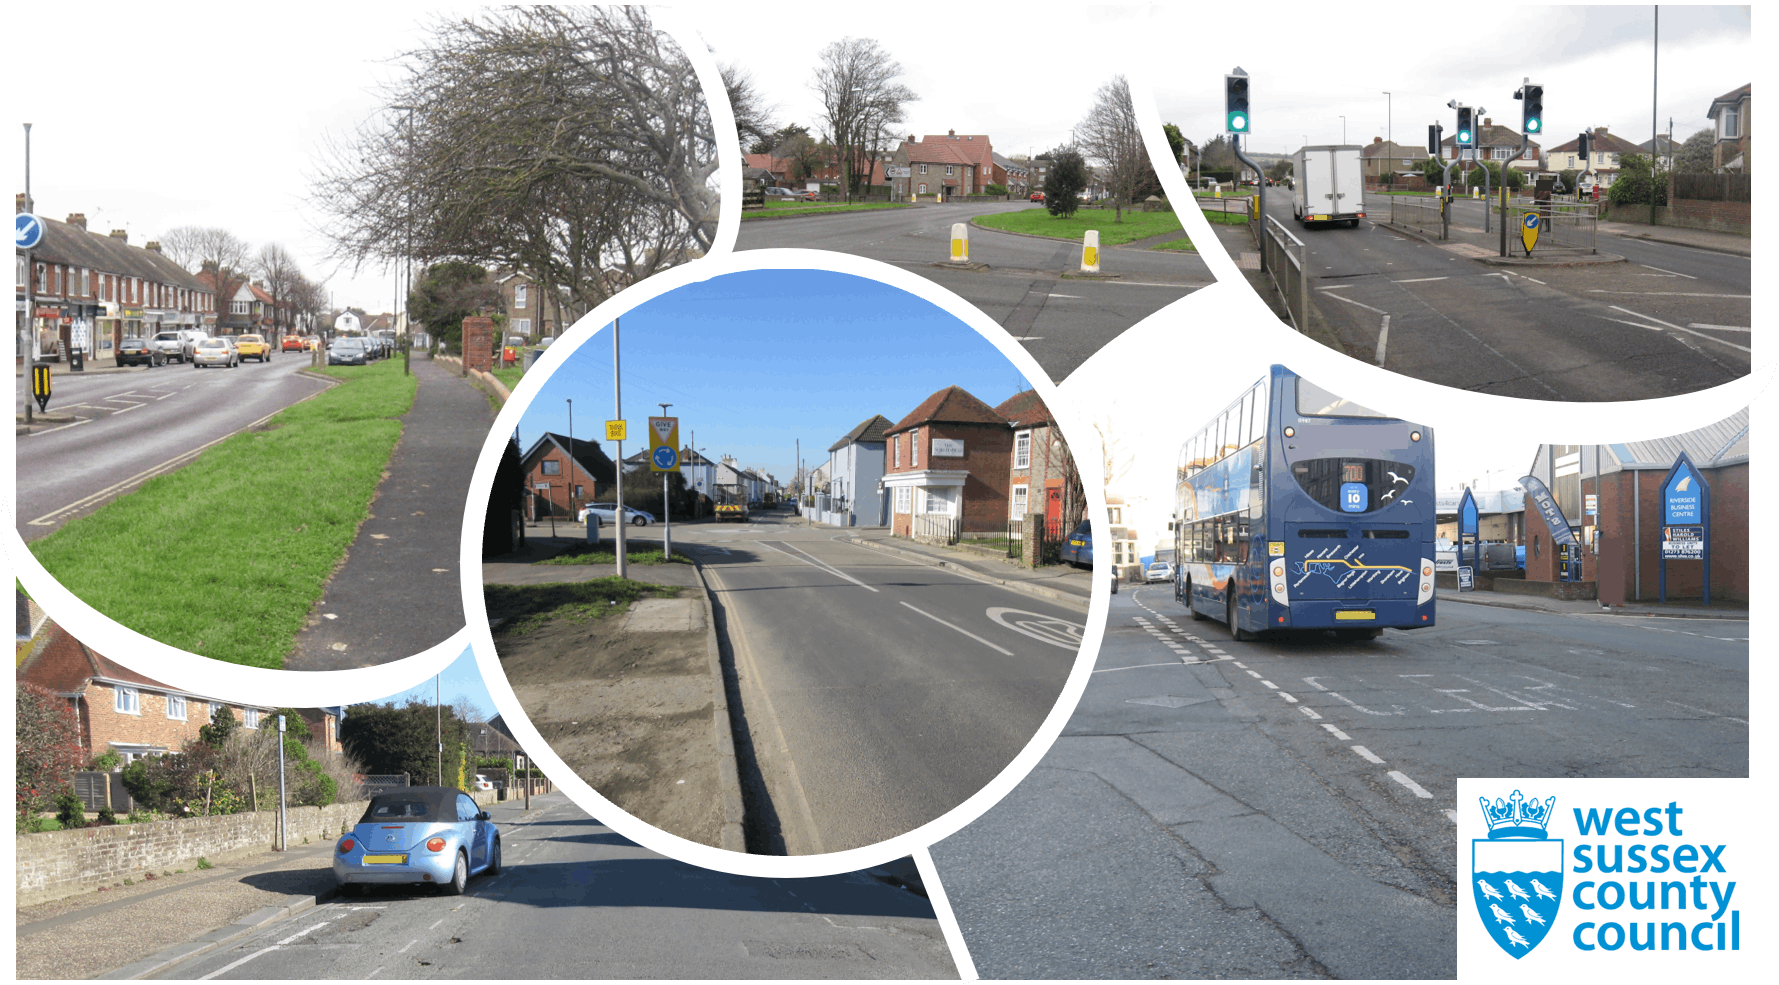 Various photos showing poor state of existing paths, cycleways, junctions and pedestrian crossings in the three areas.